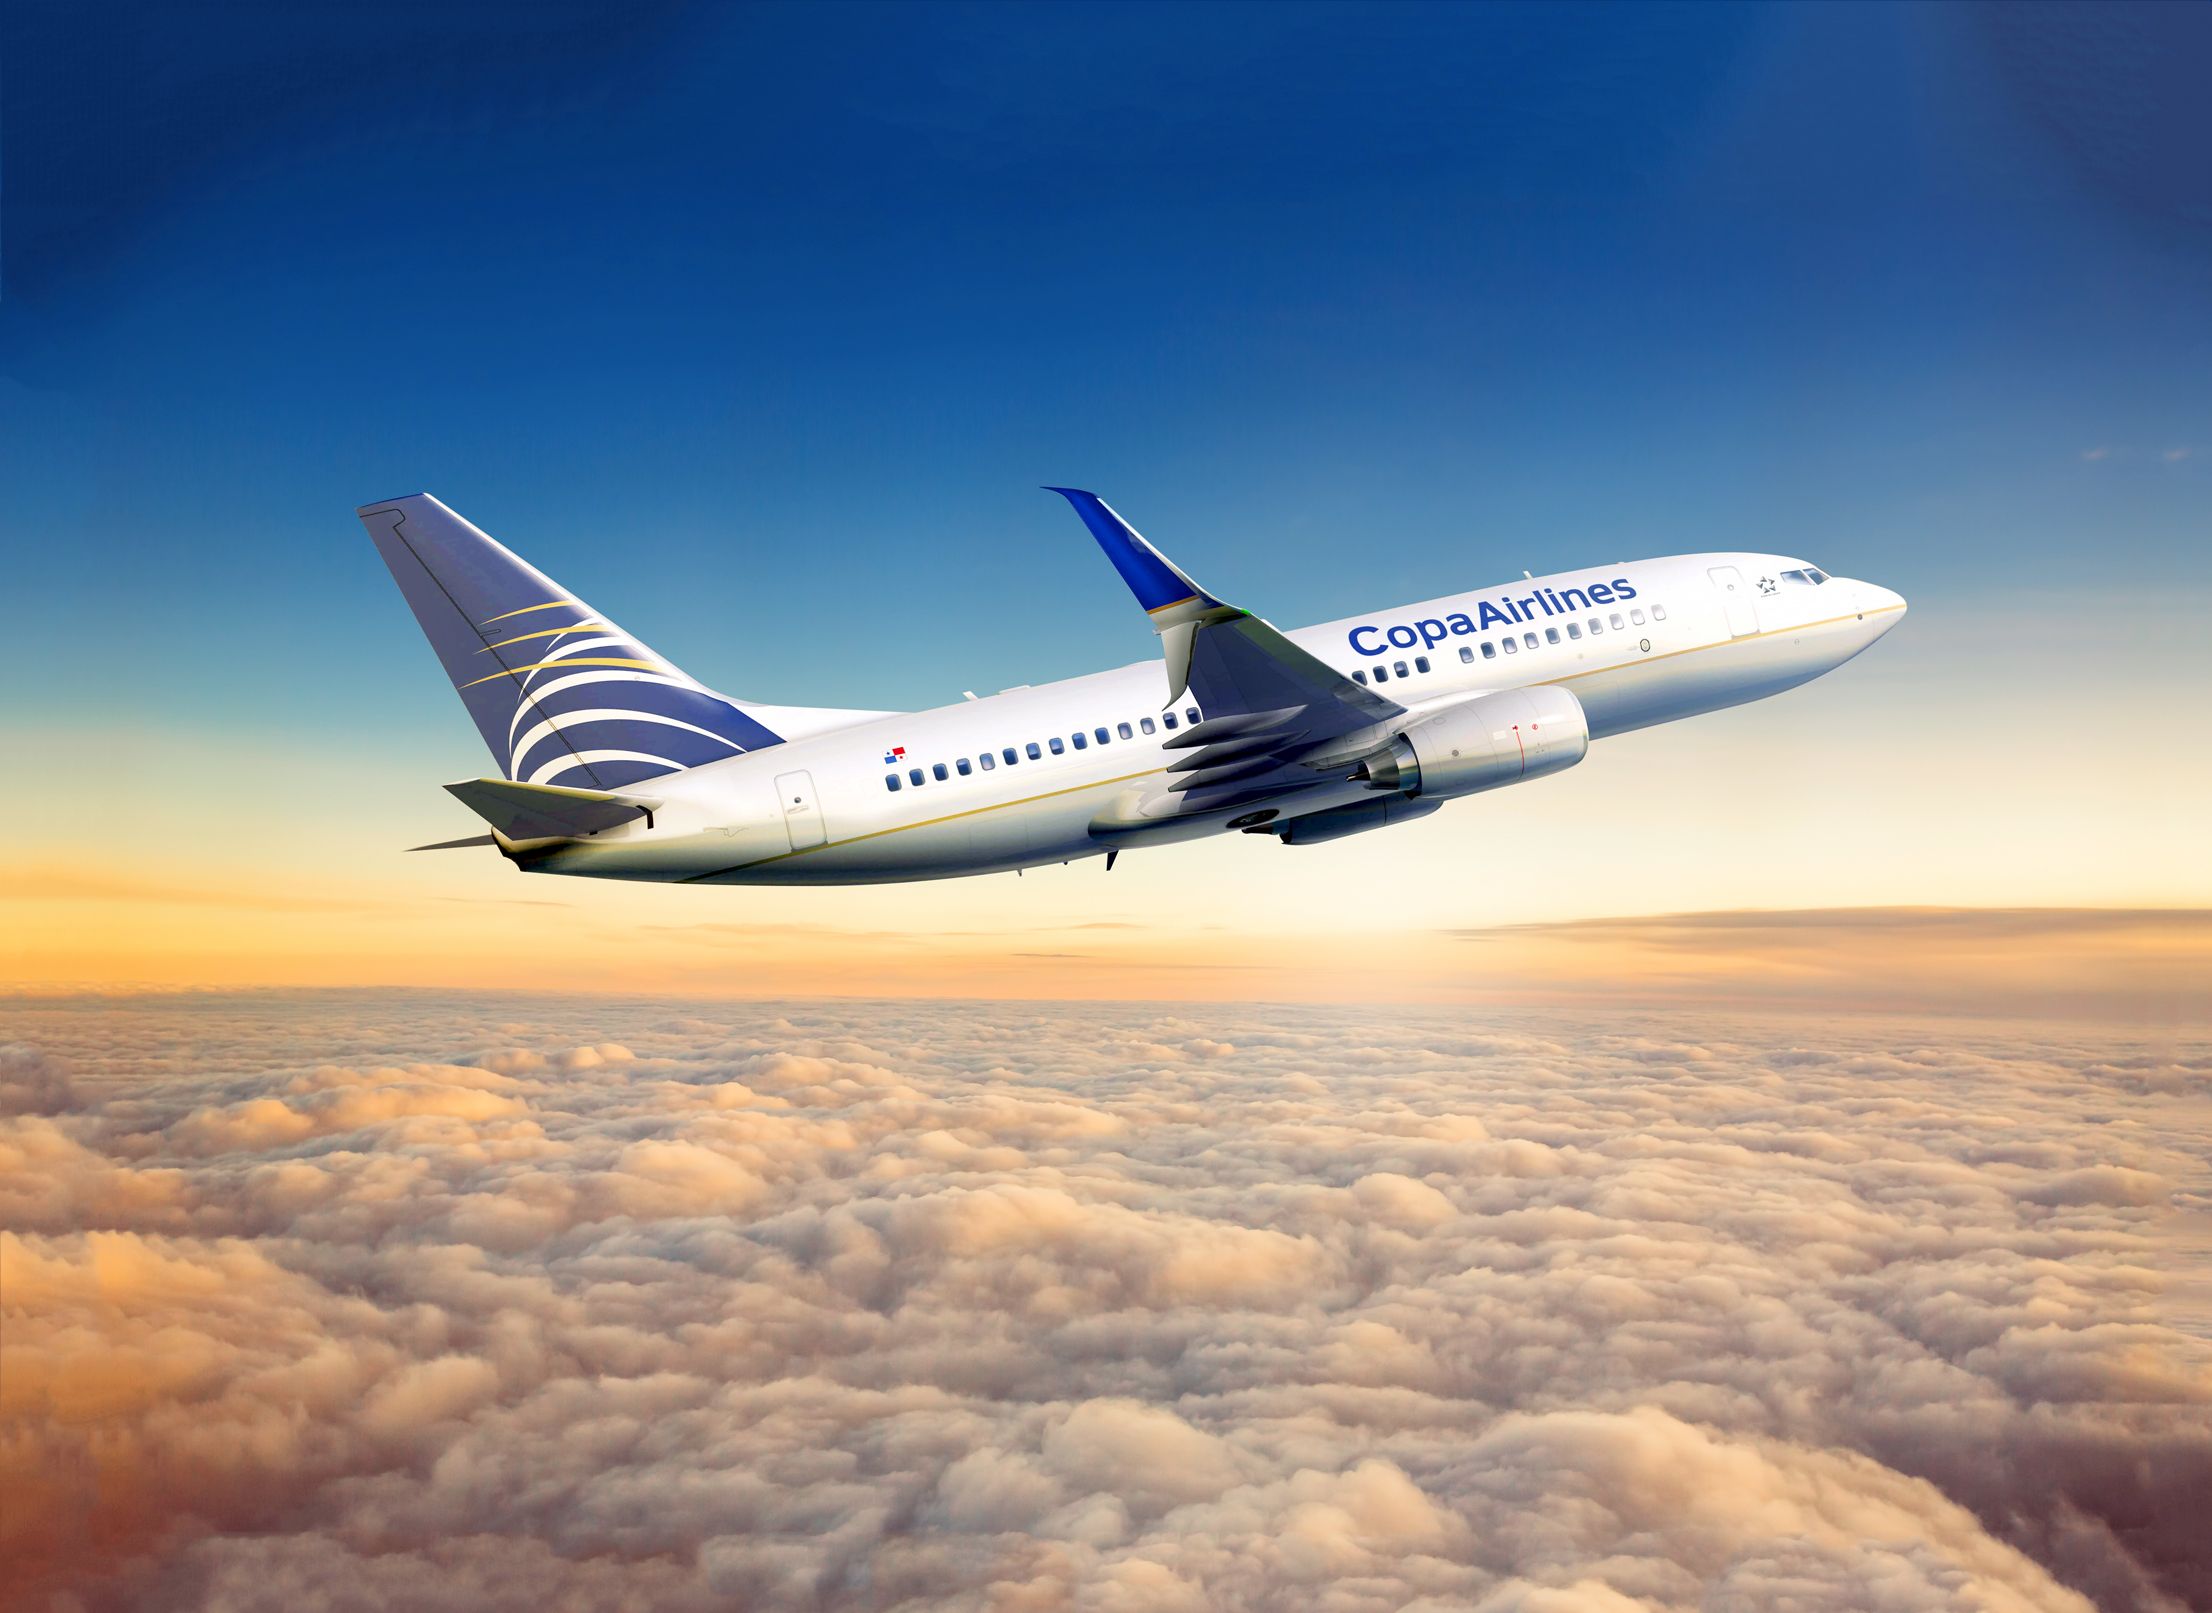 A Copa Airlines aircraft. 